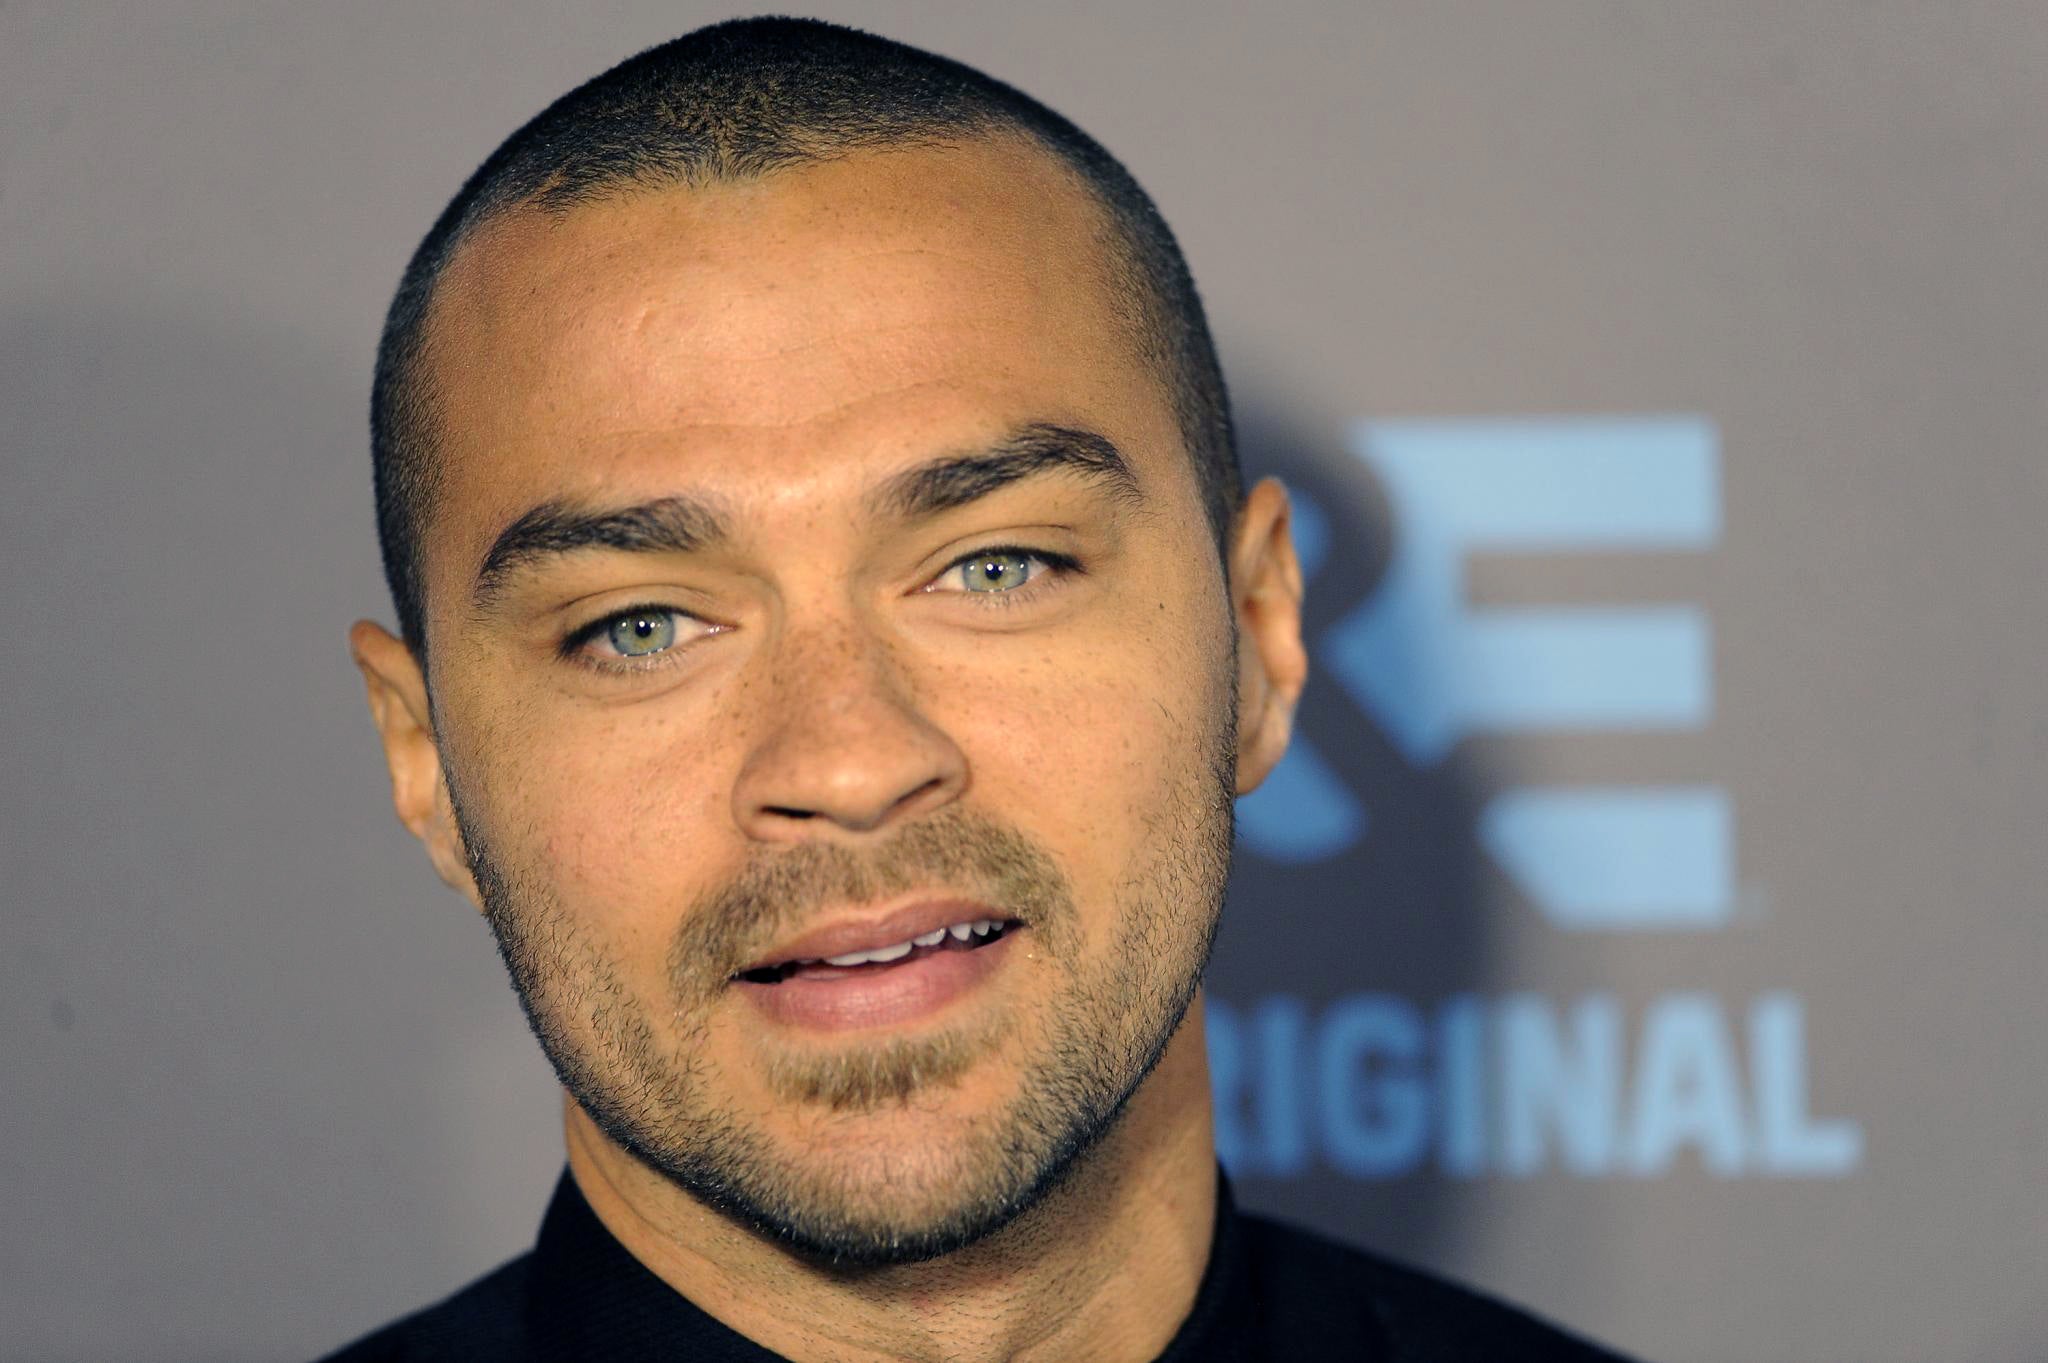 Jesse Williams Tweets About Baltimore Unrest: 'There Is Nothing Black About Rioting'
